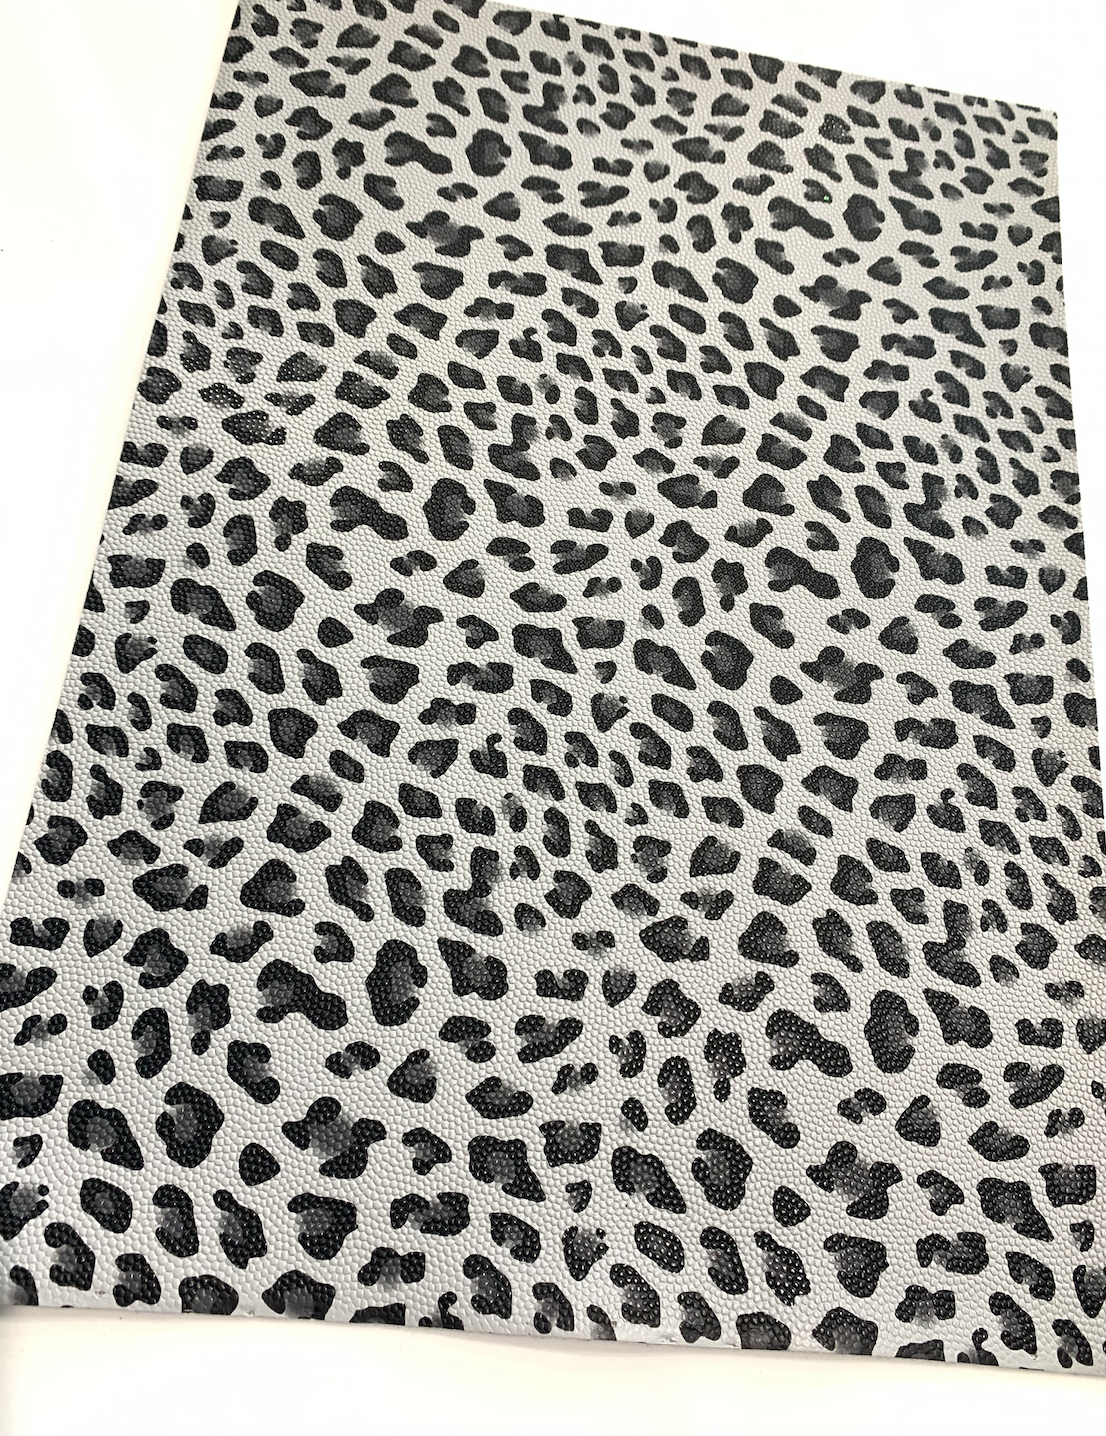 Pale Grey Leopard Faux Leather Fabric